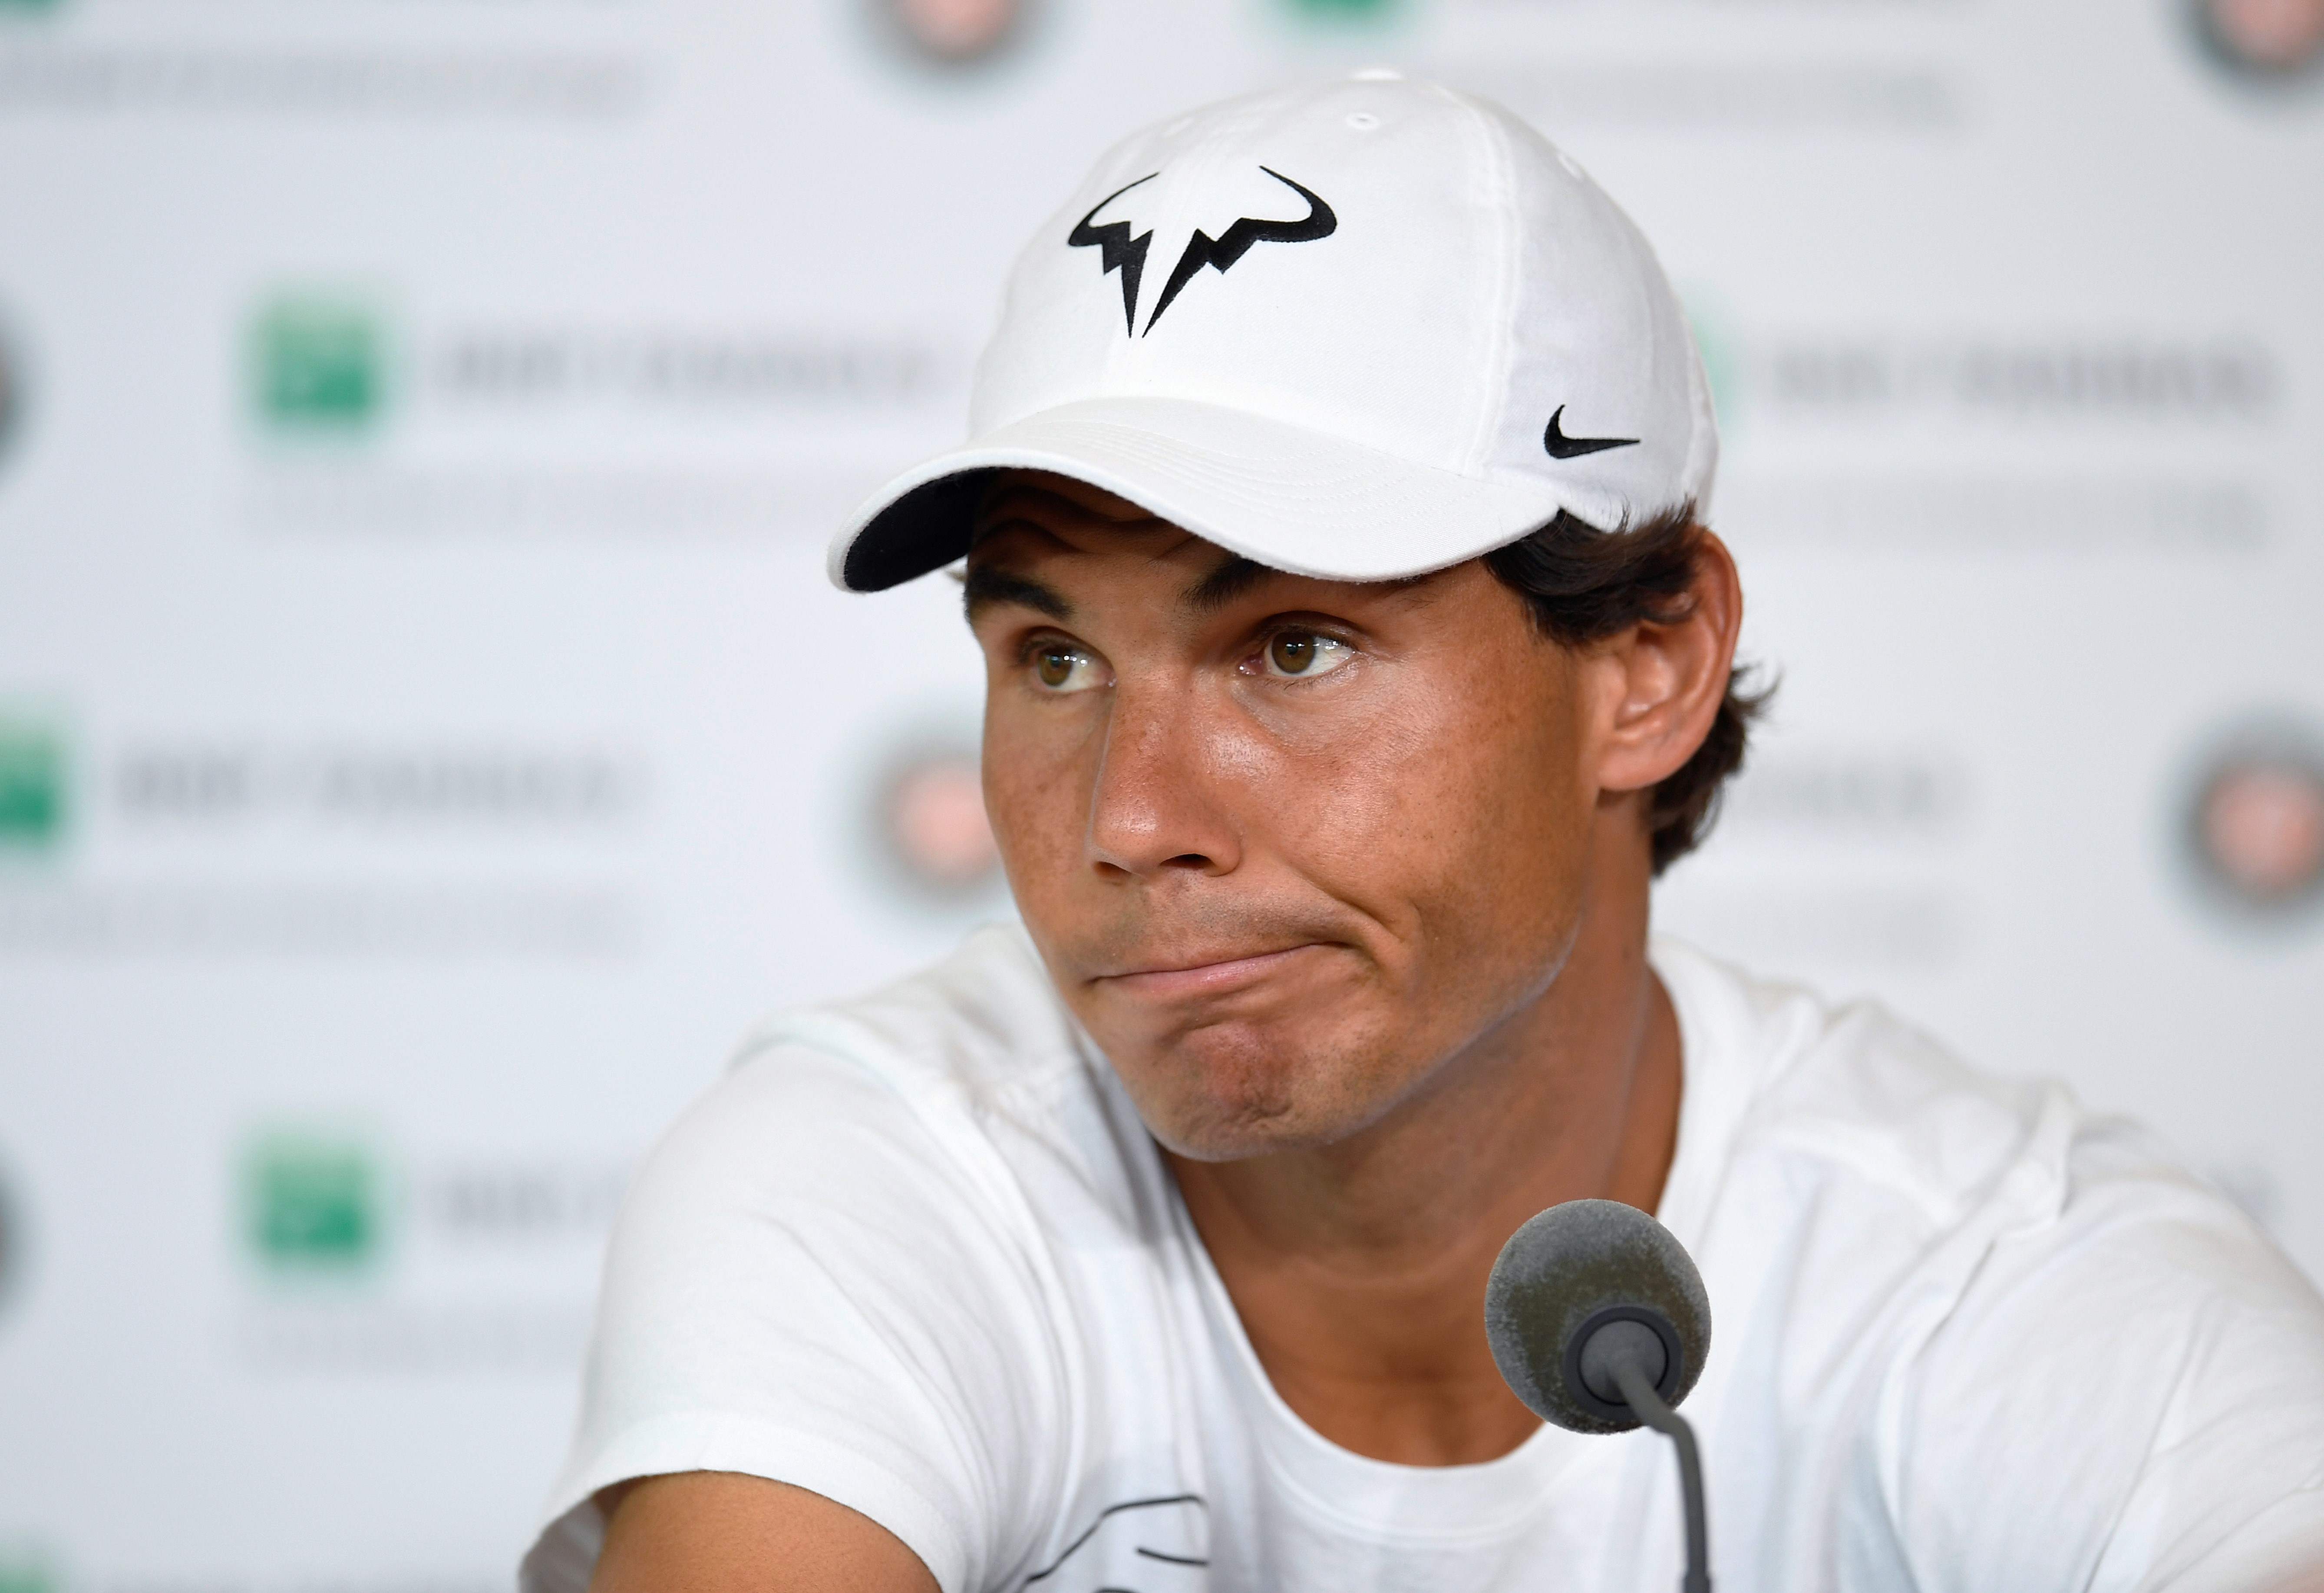 Nadal pulls out of French Open with wrist injury